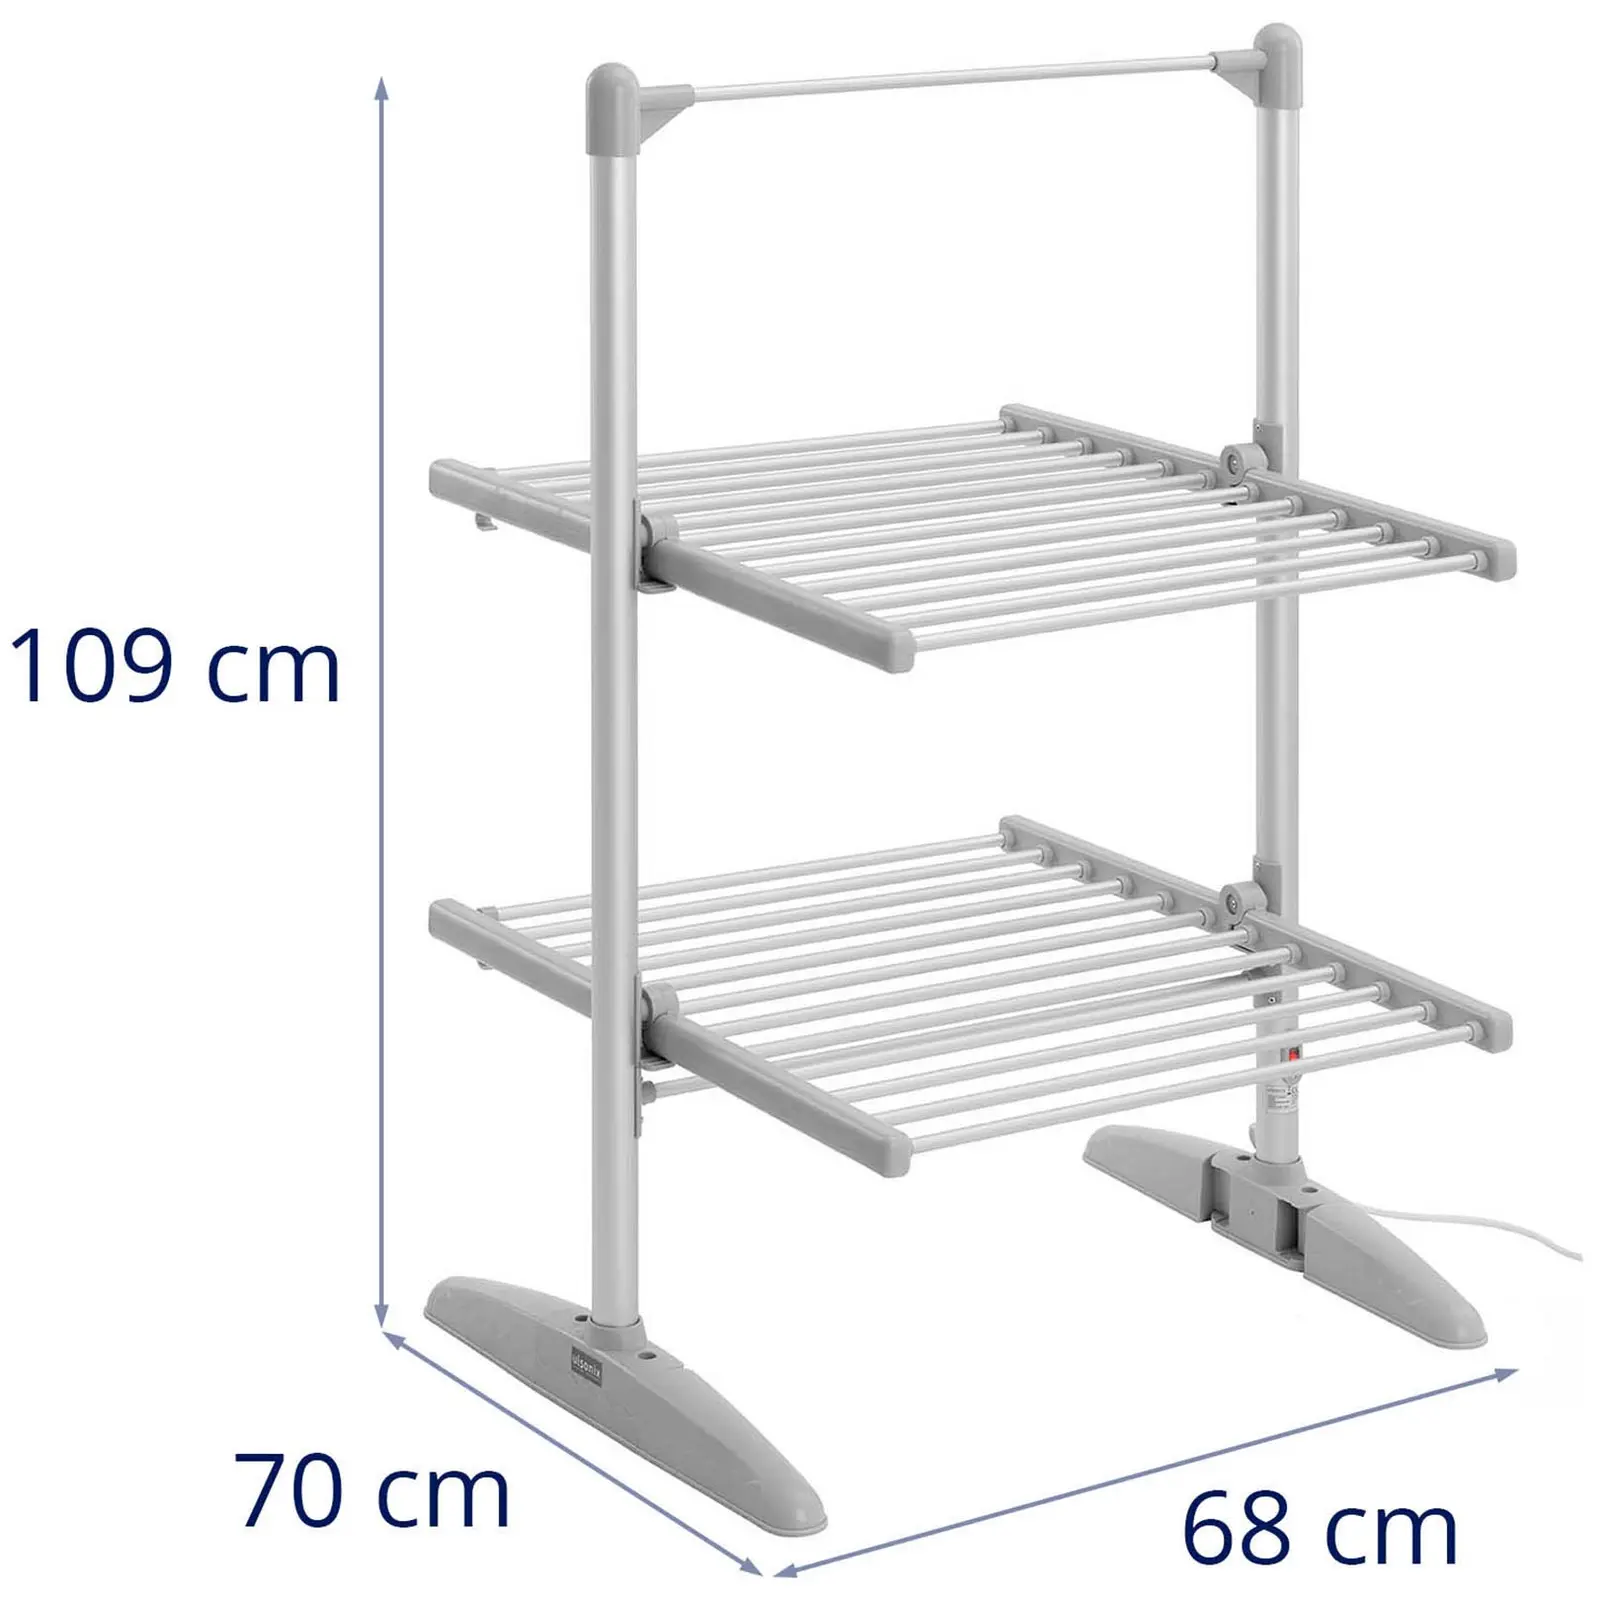 Heated Clothes Airer - 24 heating rods